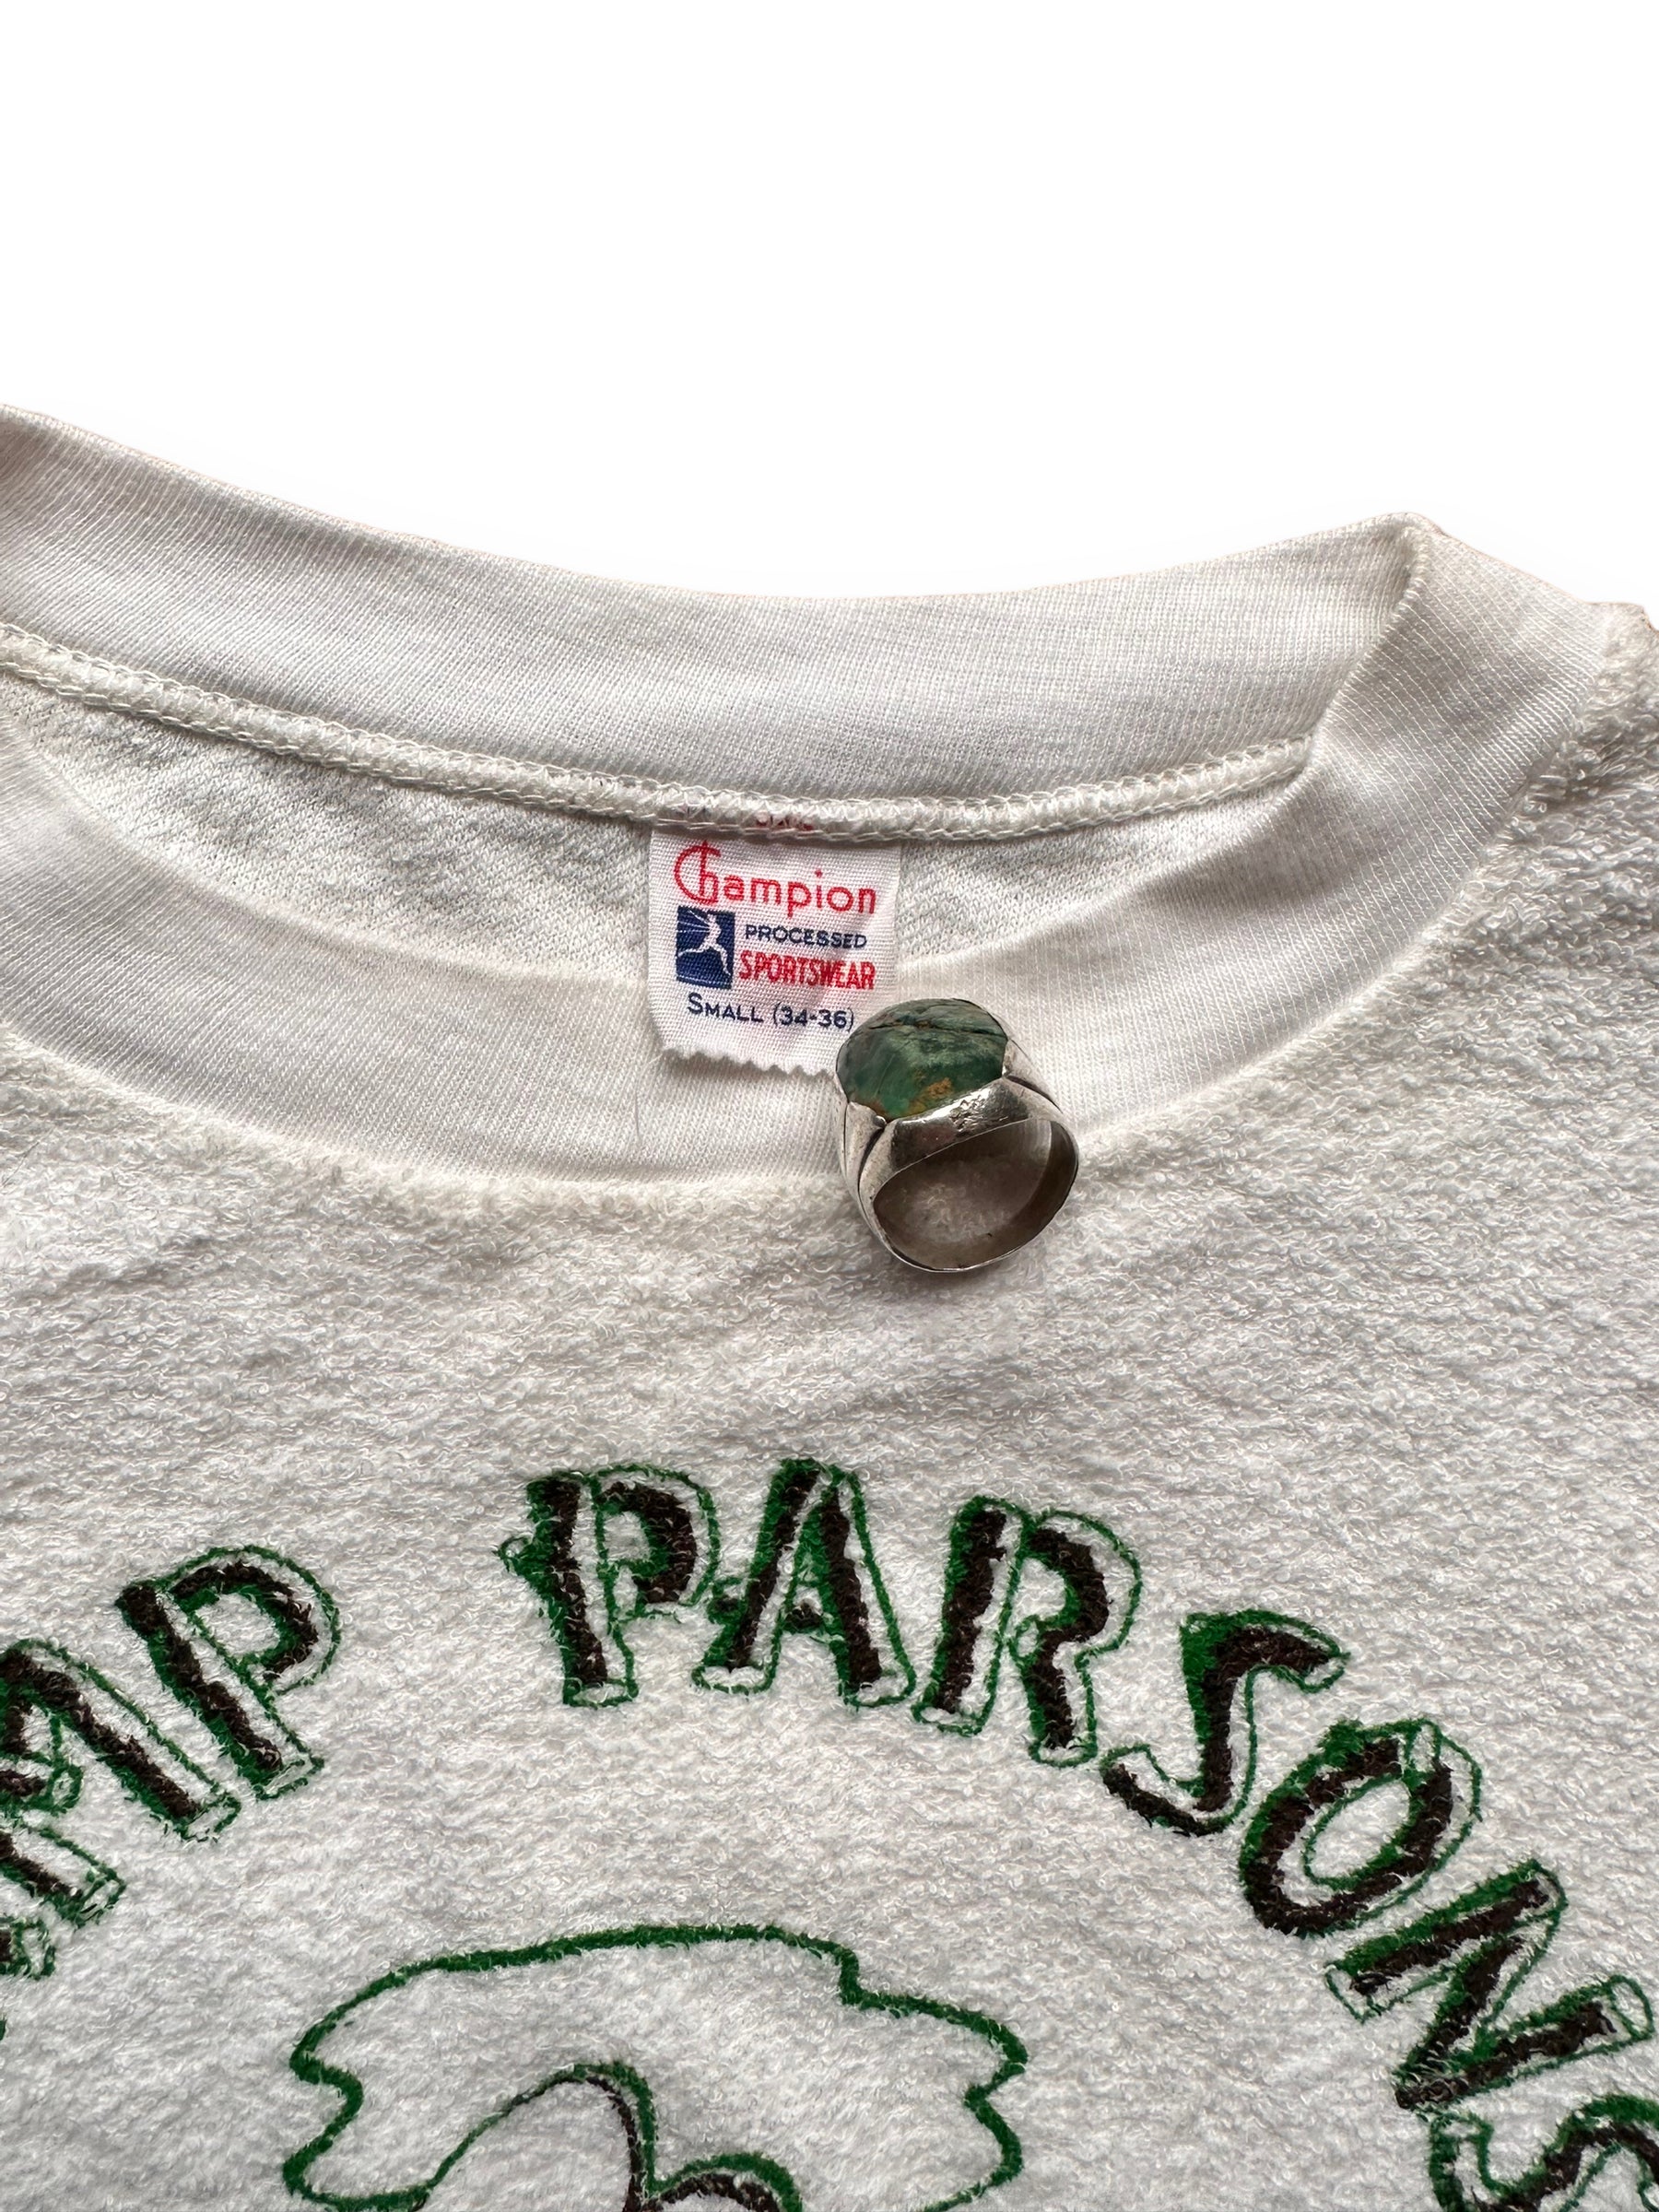 Tag View of Vintage Champion Camp Parsons BSA Camp Terry Cloth Shirt SZ SM | Vintage Boy Scout Camp Shirt | Seattle Vintage Clothing